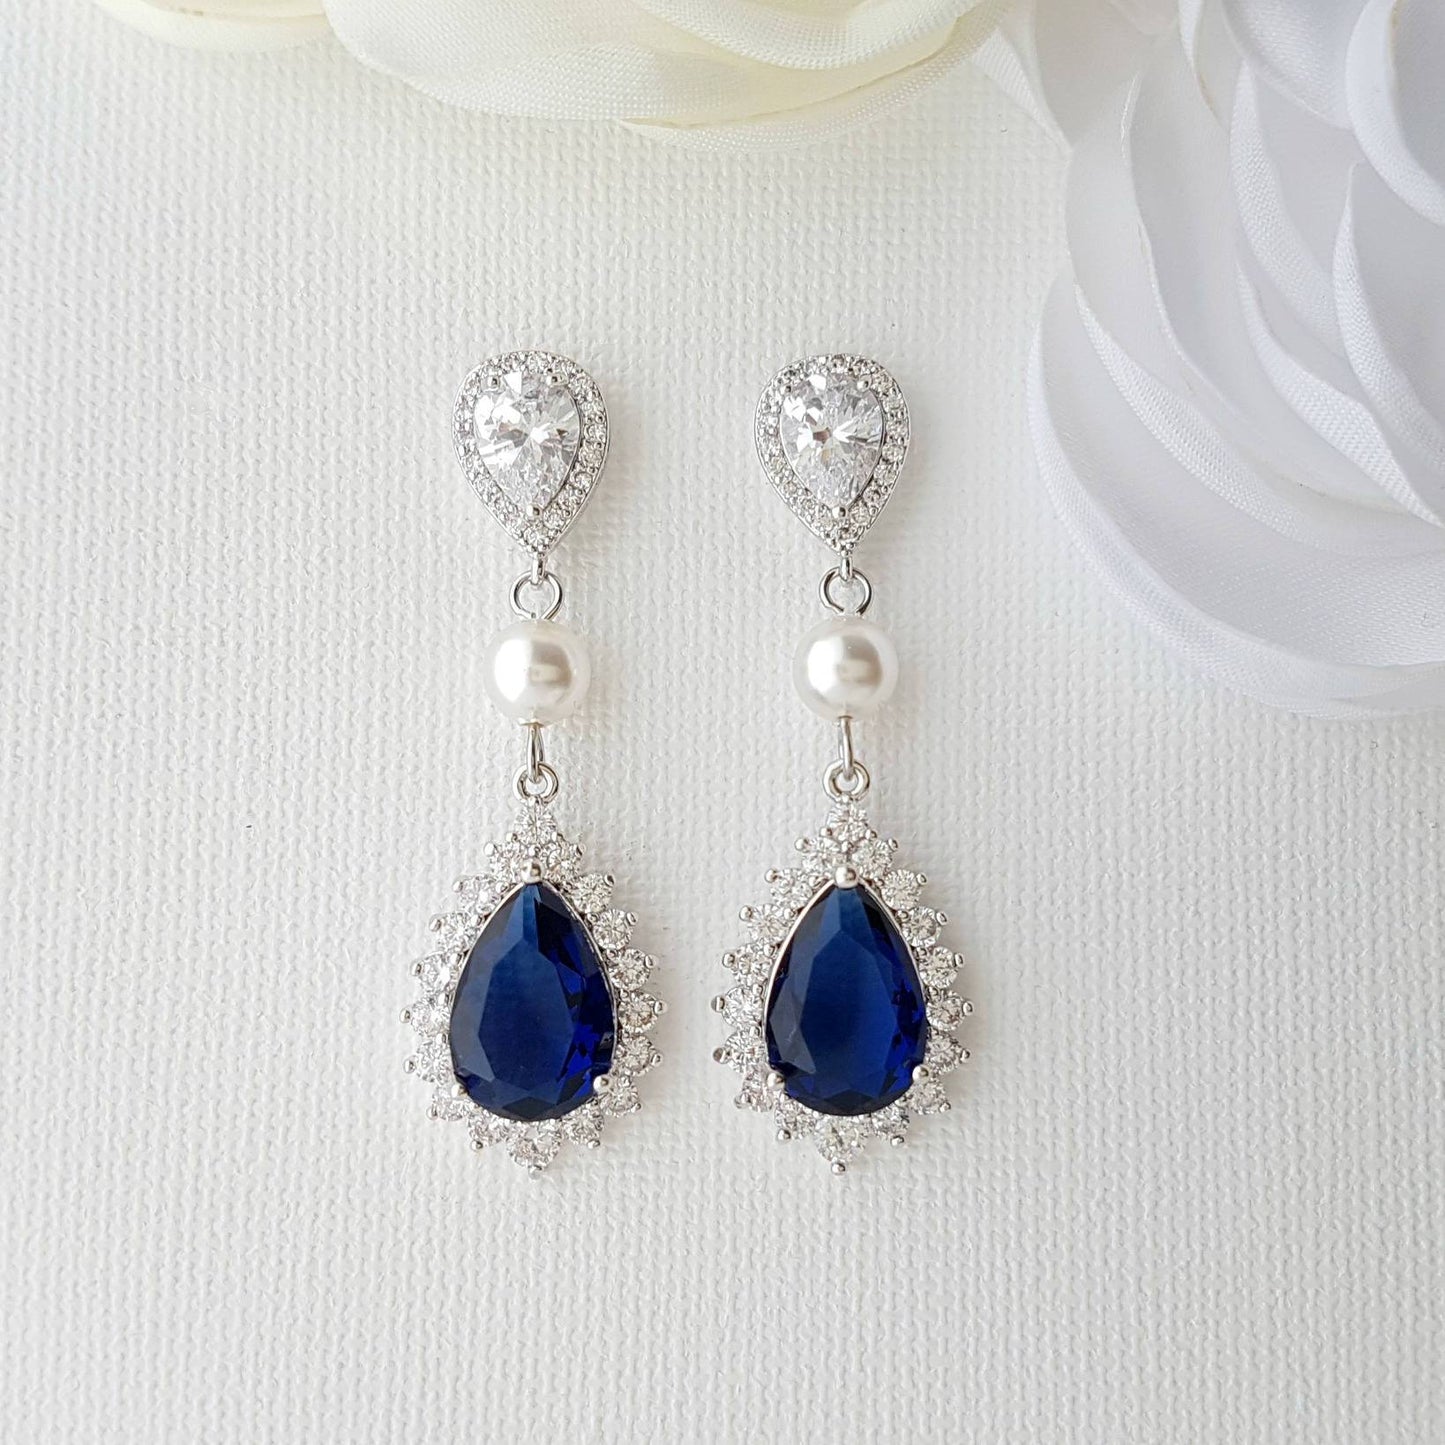 Blue and Silver Drop Earrings